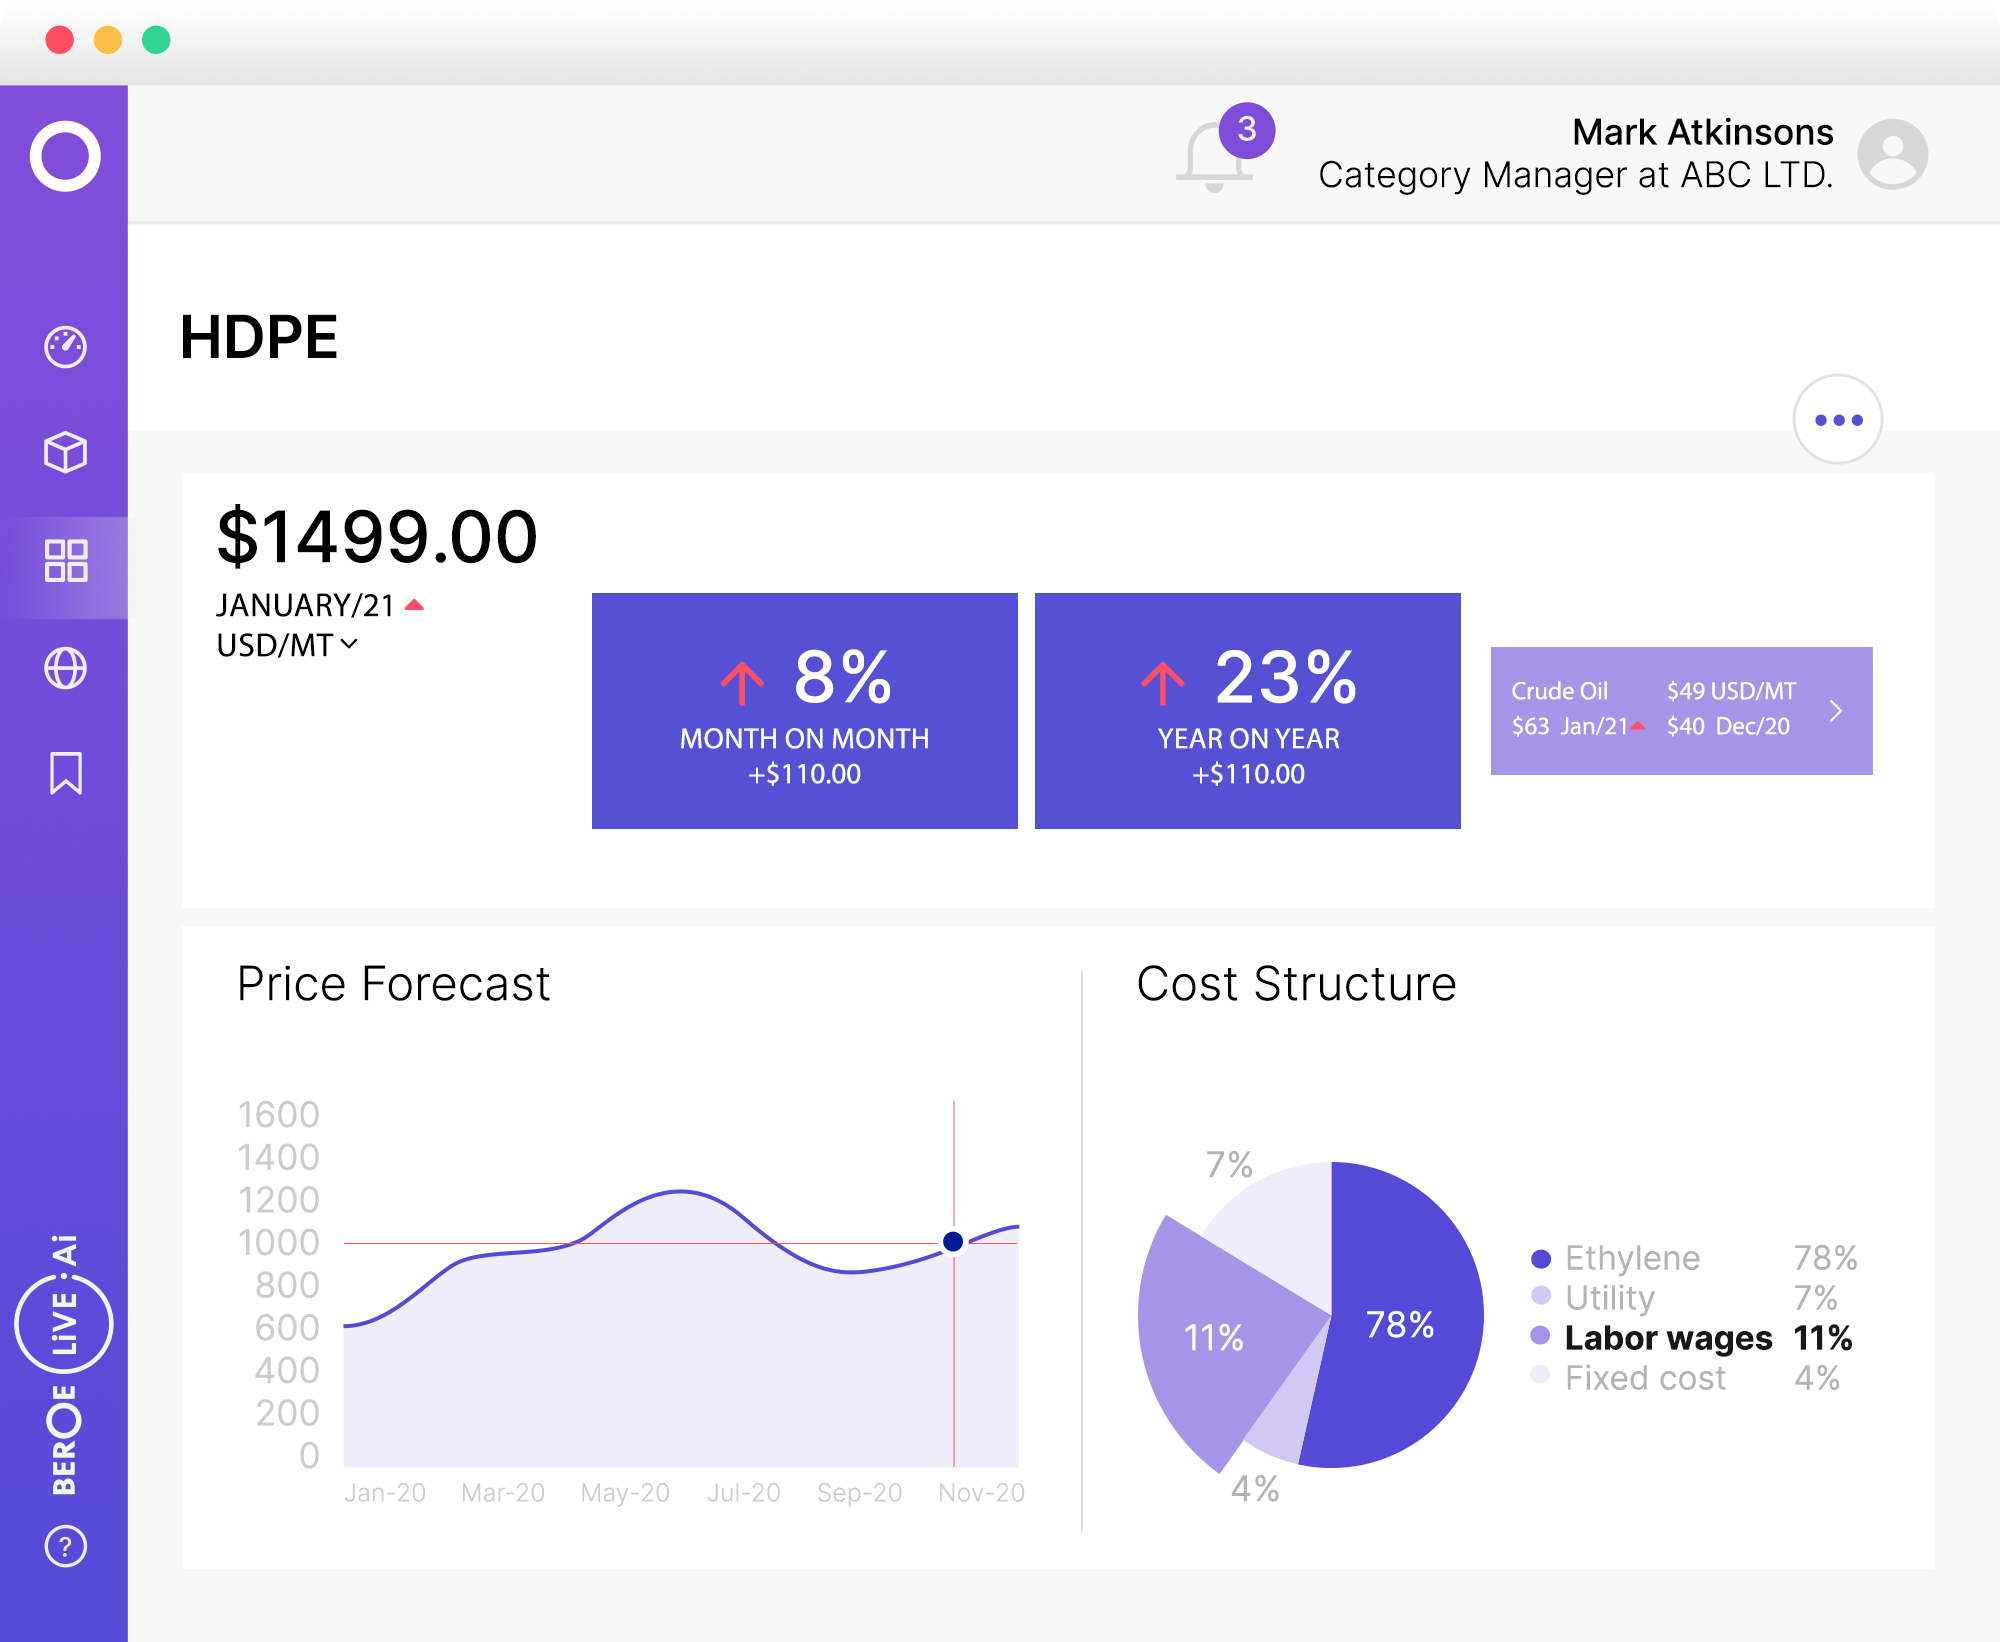 Market Monitoring Dashboard - Monitor and forecast price changes across products, services, and commodities on a real-time basis. Build cost models to understand the correlation between costs, margins, and prices impacting your category.